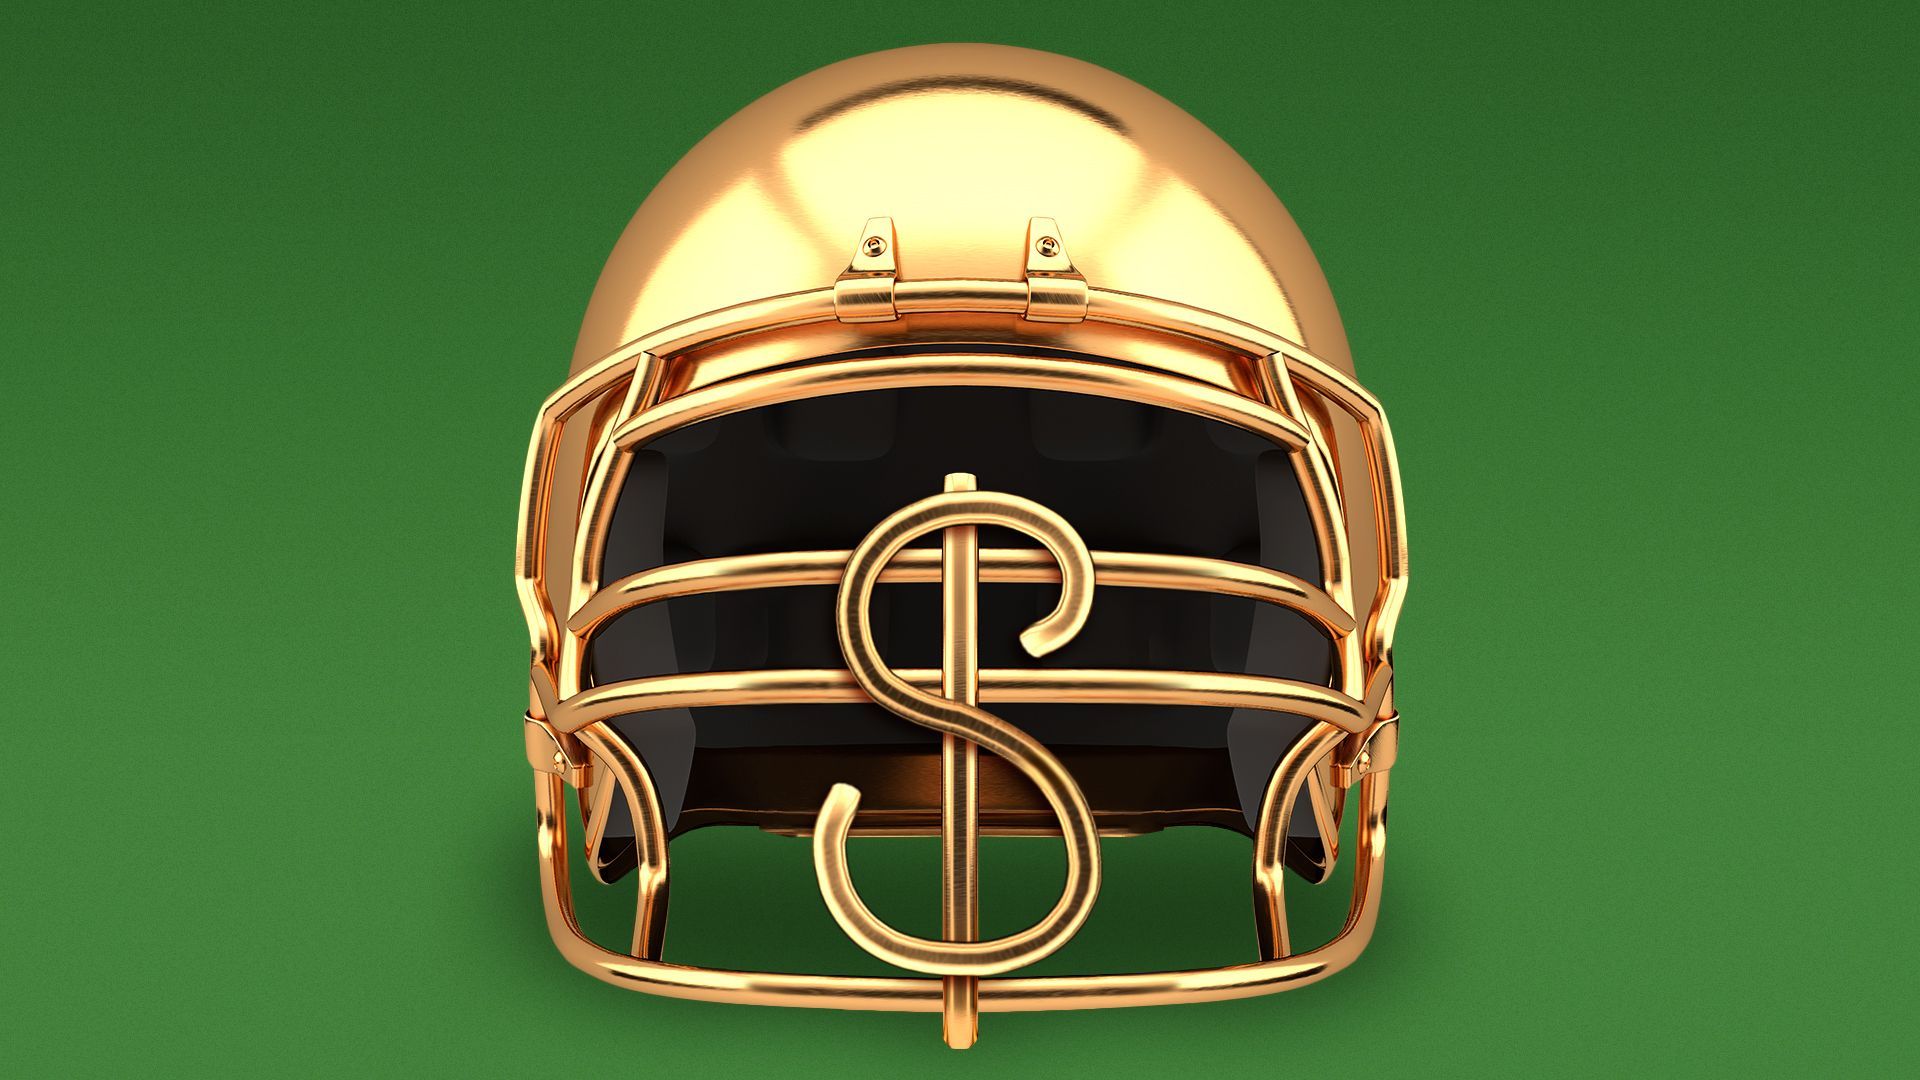 Illustration of a golden football helmet with a front grill shaped like a dollar bill sign